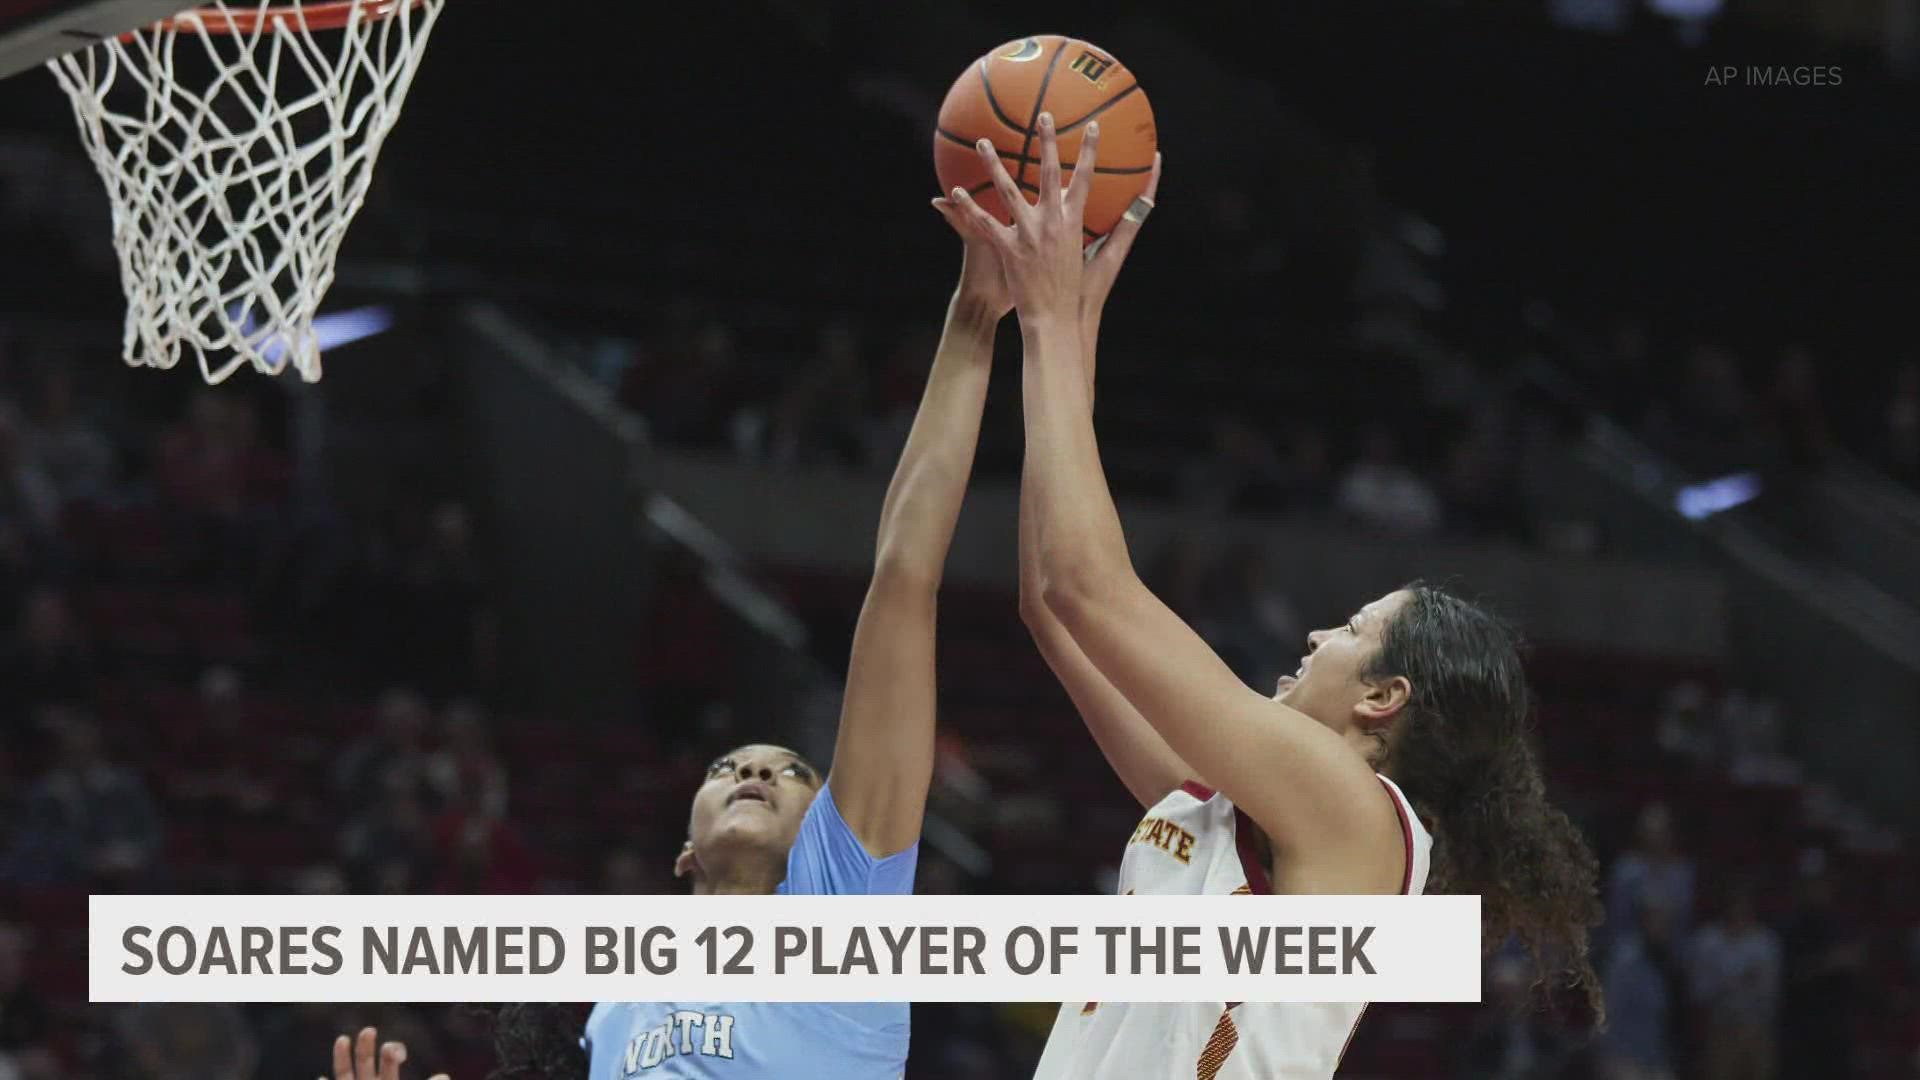 She's the second straight Iowa State player to receive the honor after Ashley Joens got it last week.